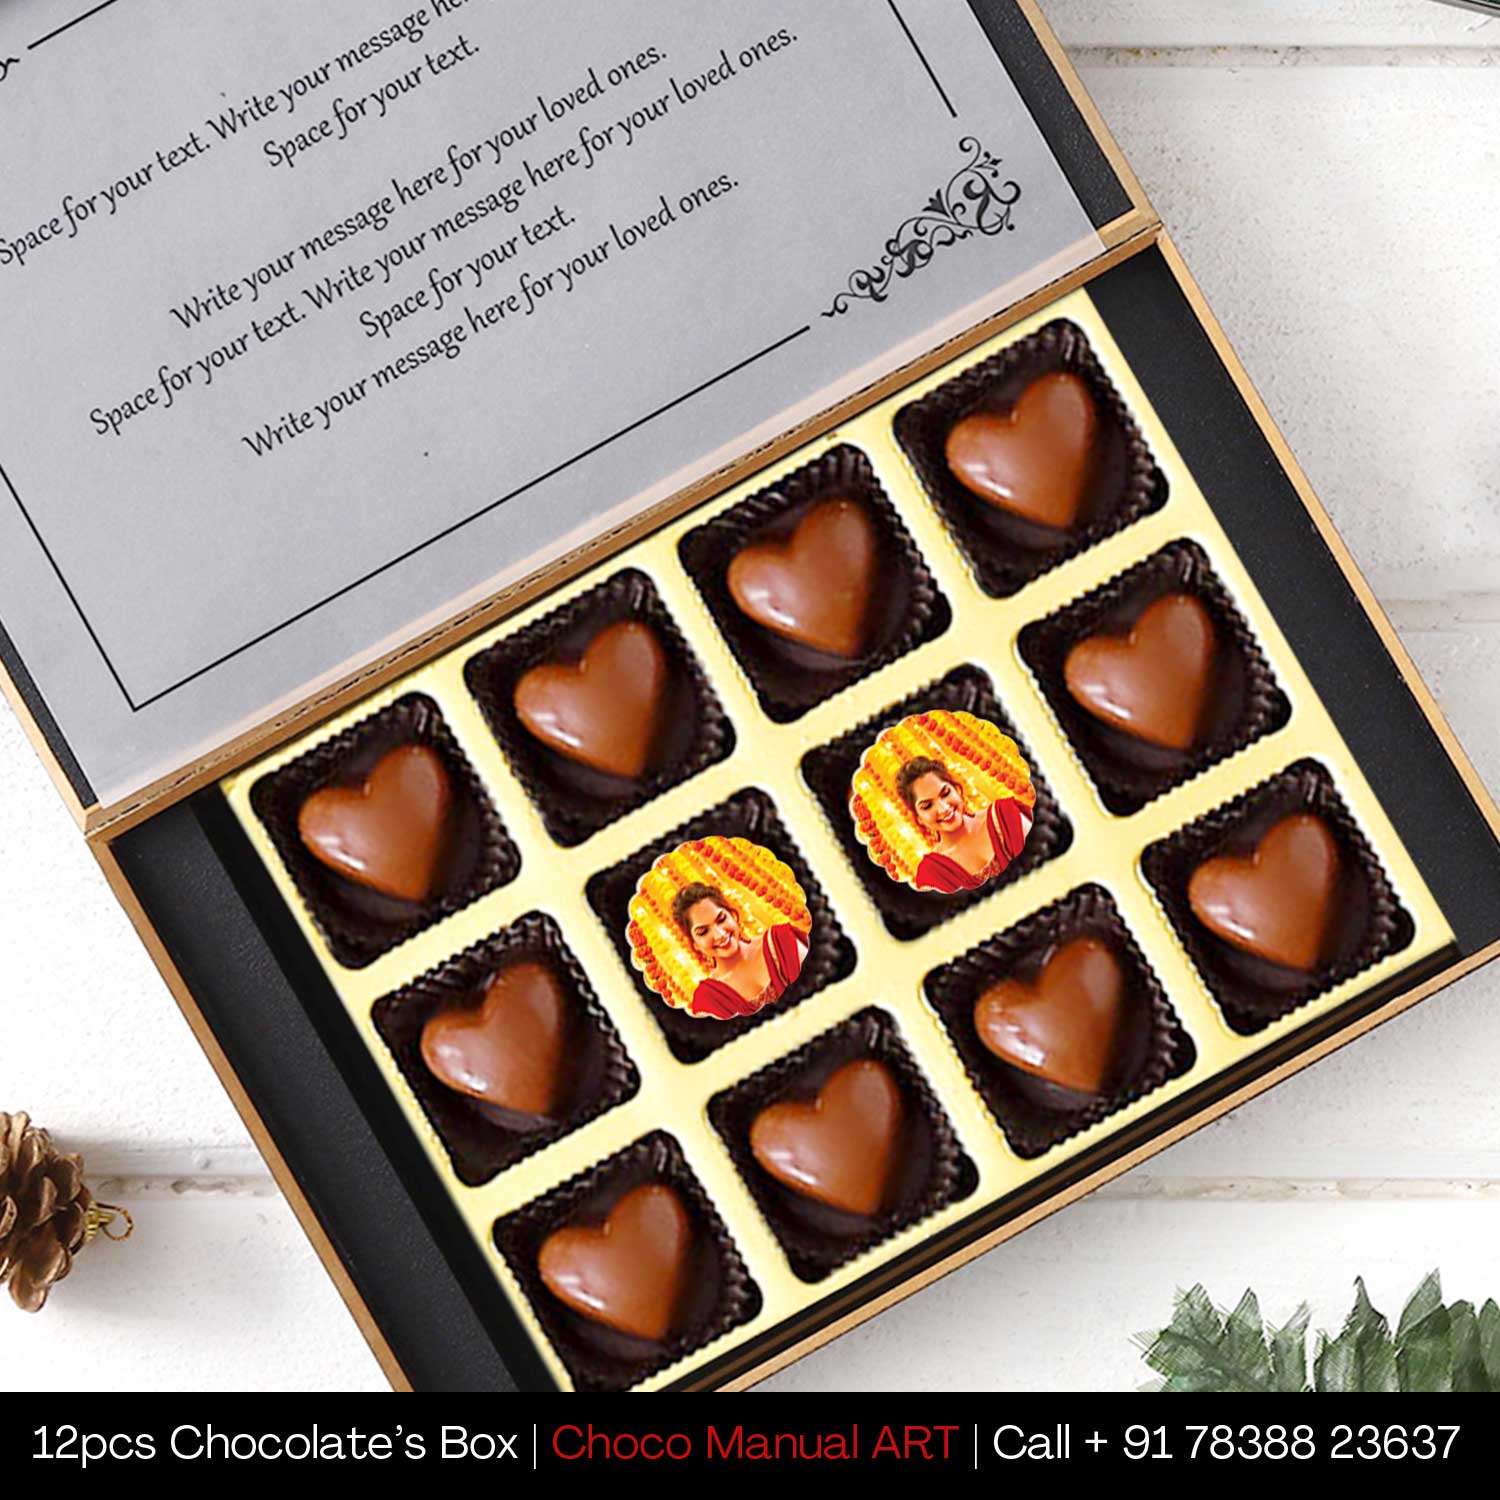 Customised Chocolate gift for Propose Day